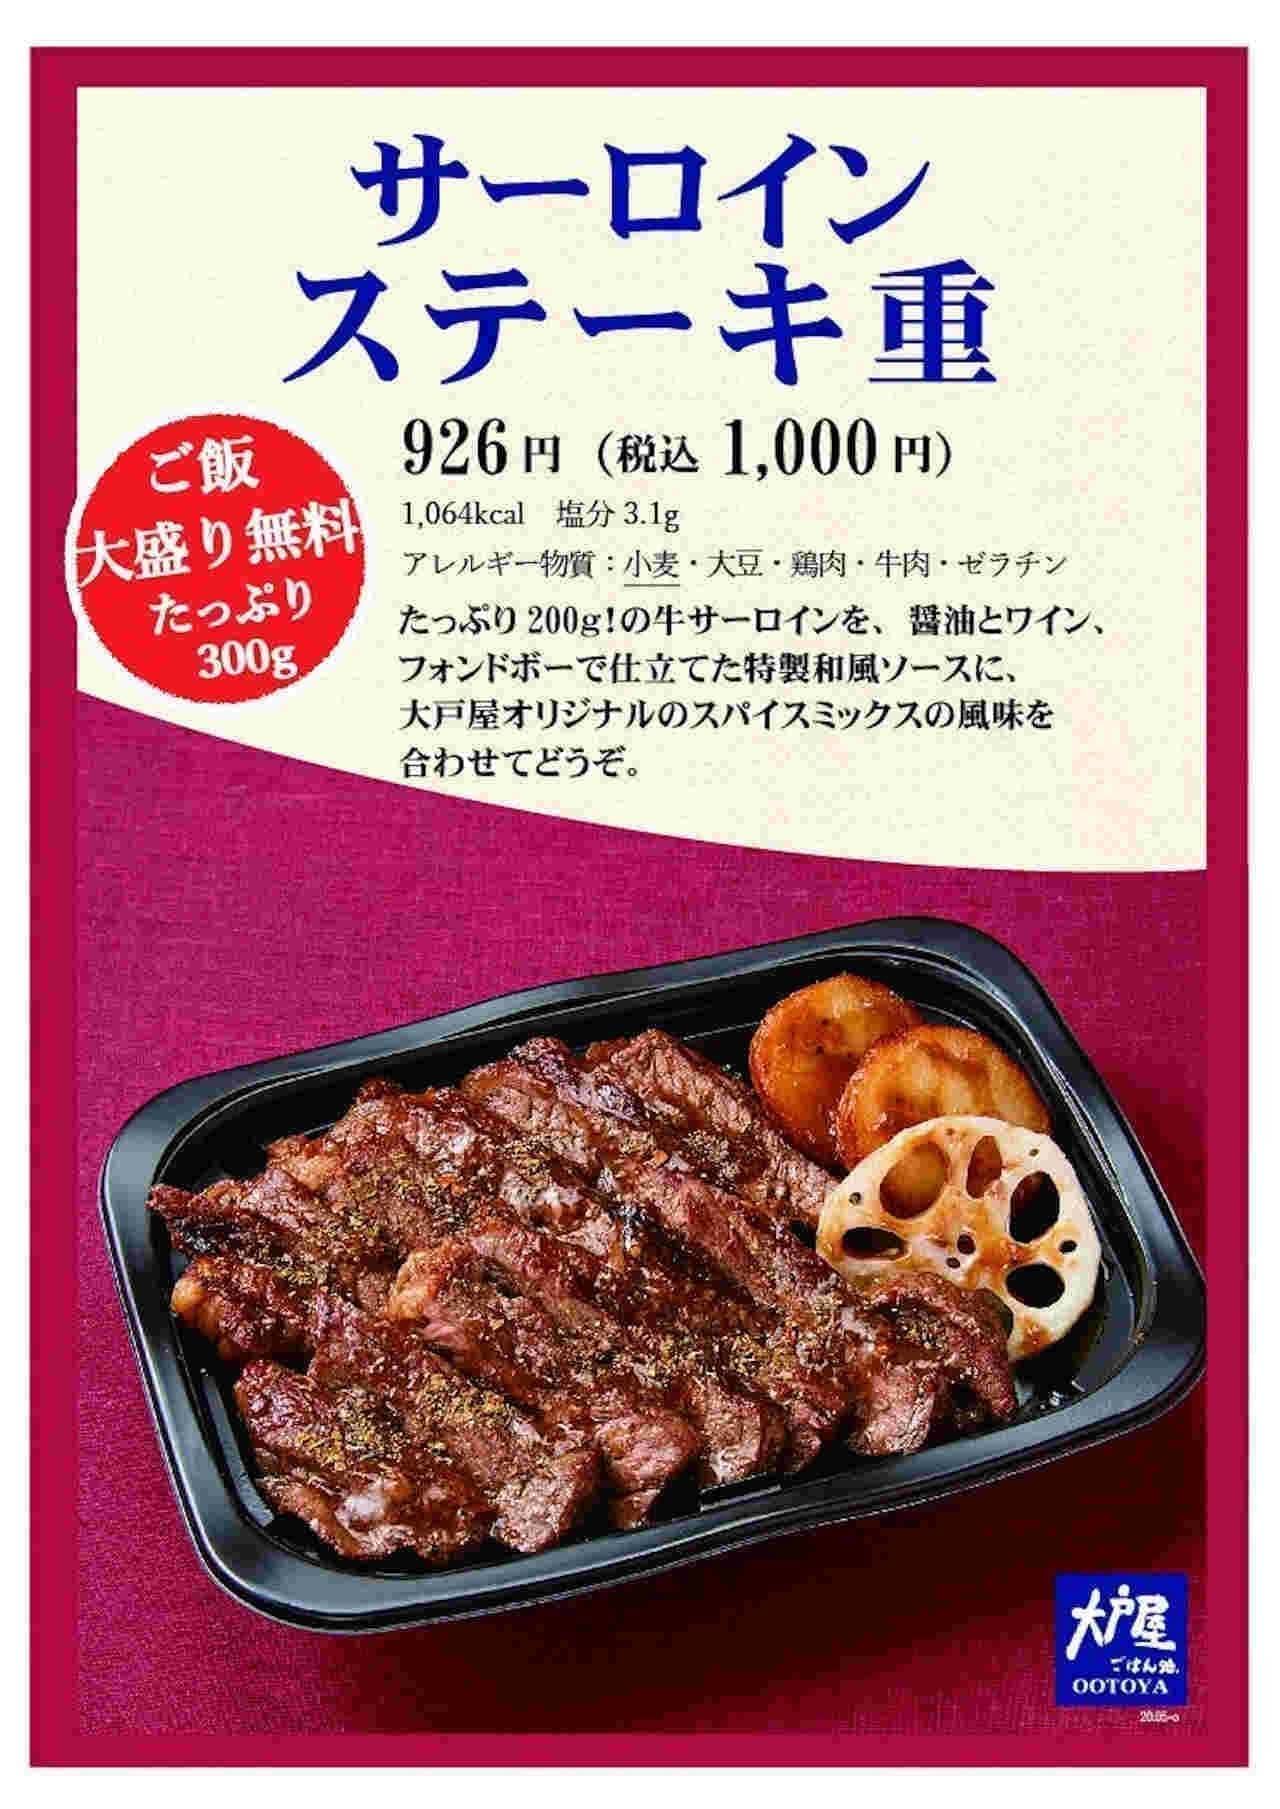 "Sirloin steak heavy" for a limited time at Ootoya